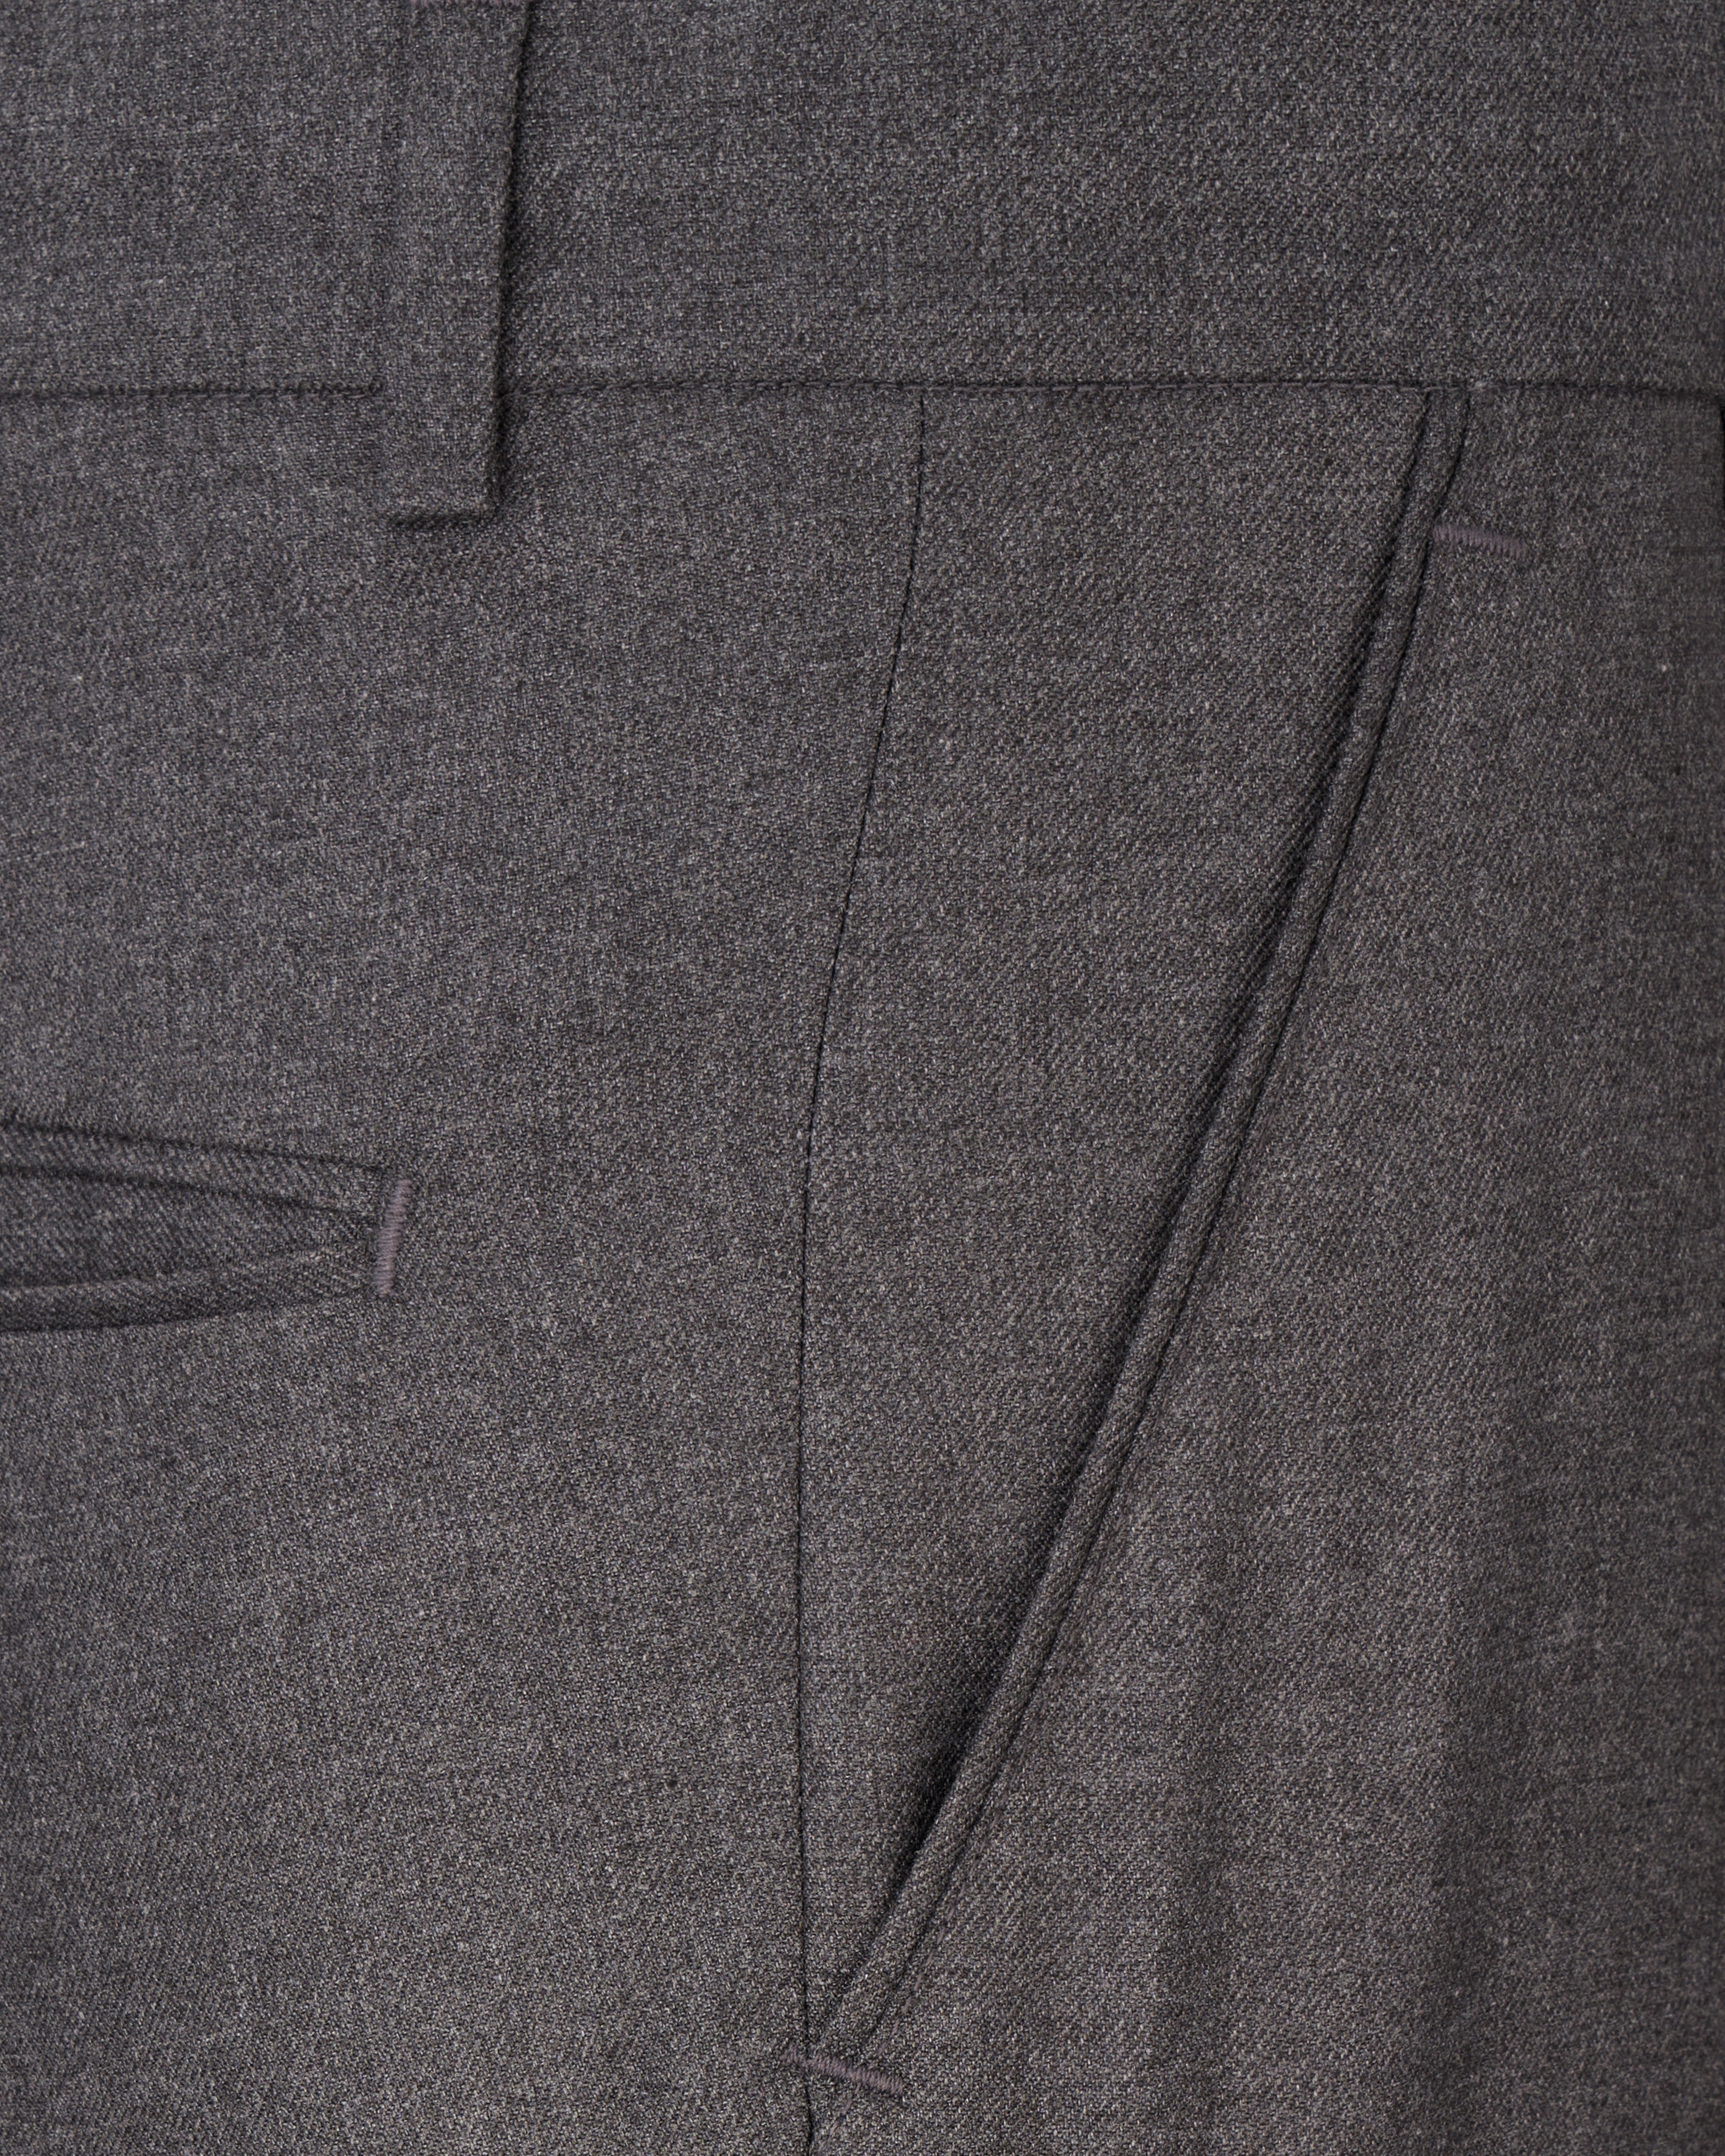 Gravel Gray Wool Rich Single Breasted Suit ST2507-SB-36, ST2507-SB-38, ST2507-SB-40, ST2507-SB-42, ST2507-SB-44, ST2507-SB-46, ST2507-SB-48, ST2507-SB-50, ST2507-SB-52, ST2507-SB-54, ST2507-SB-56, ST2507-SB-58, ST2507-SB-60